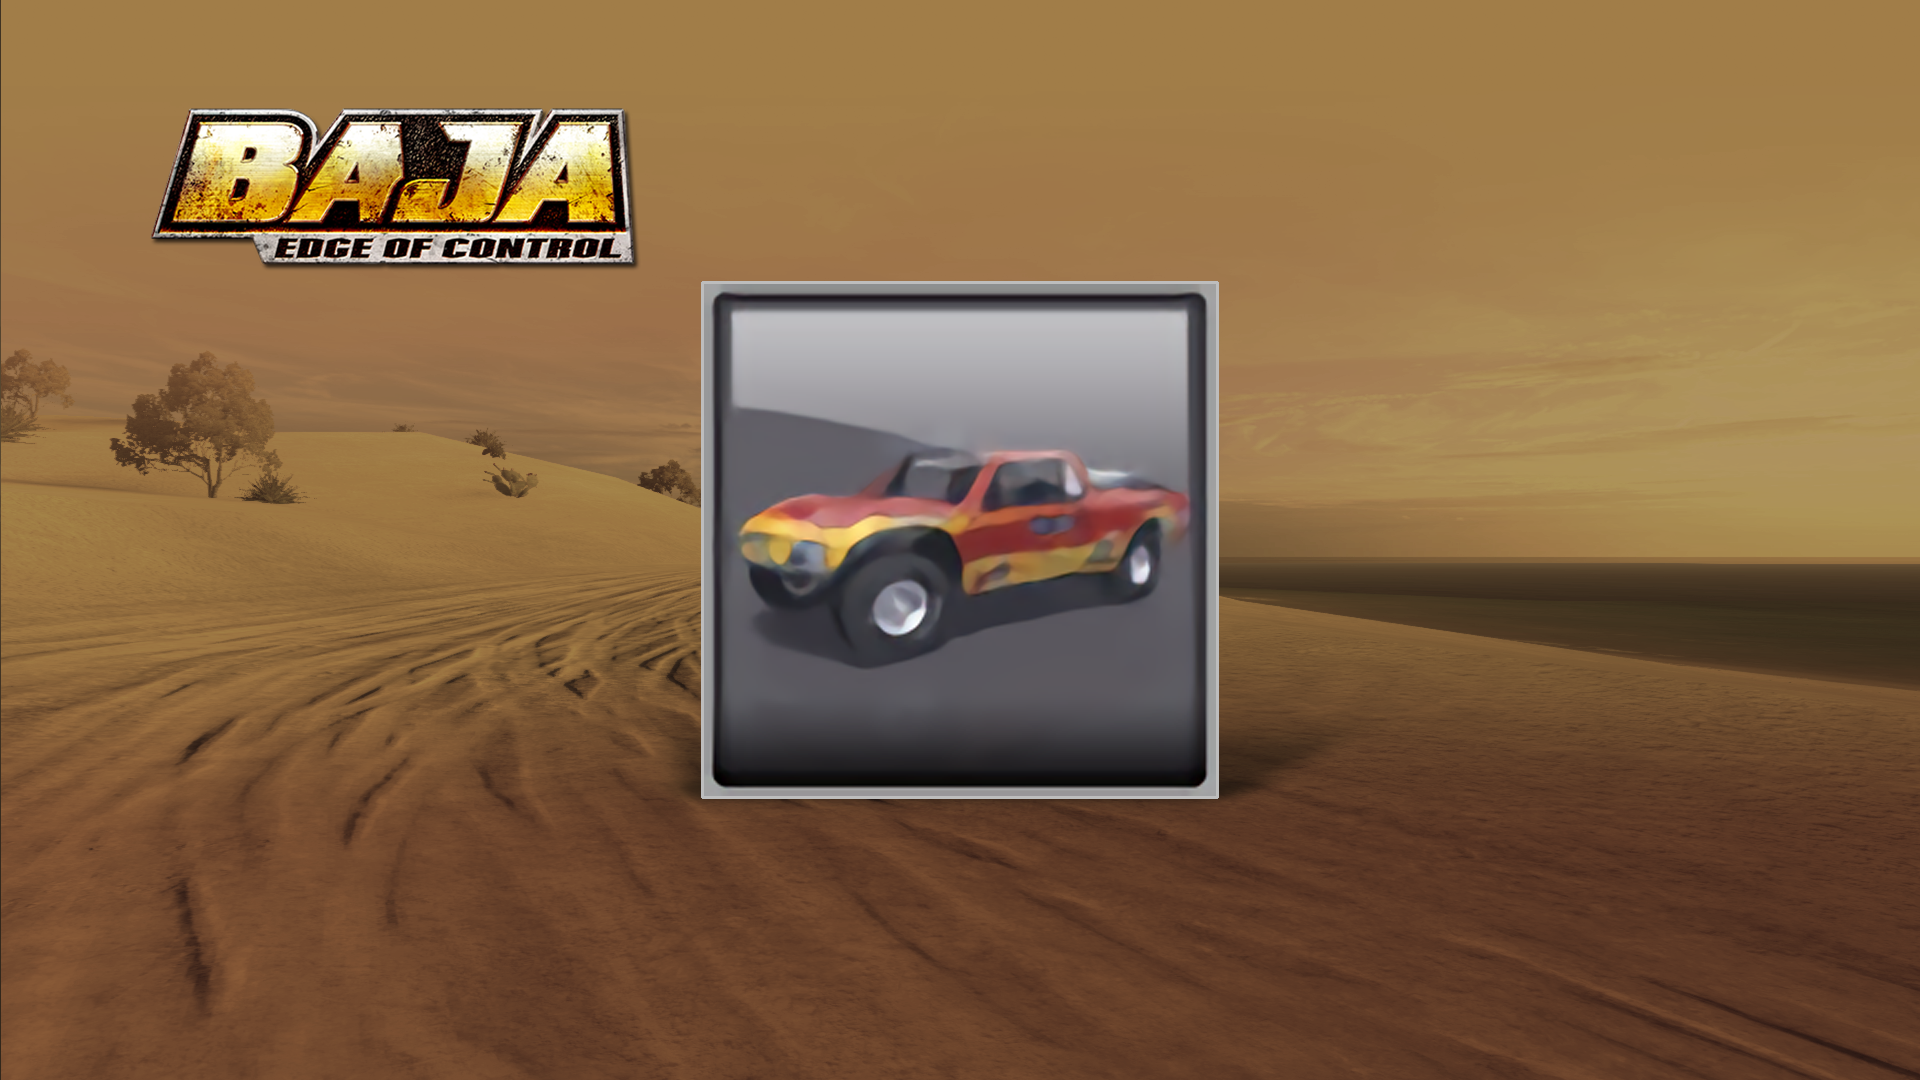 Icon for Trophy Truck Experience Level